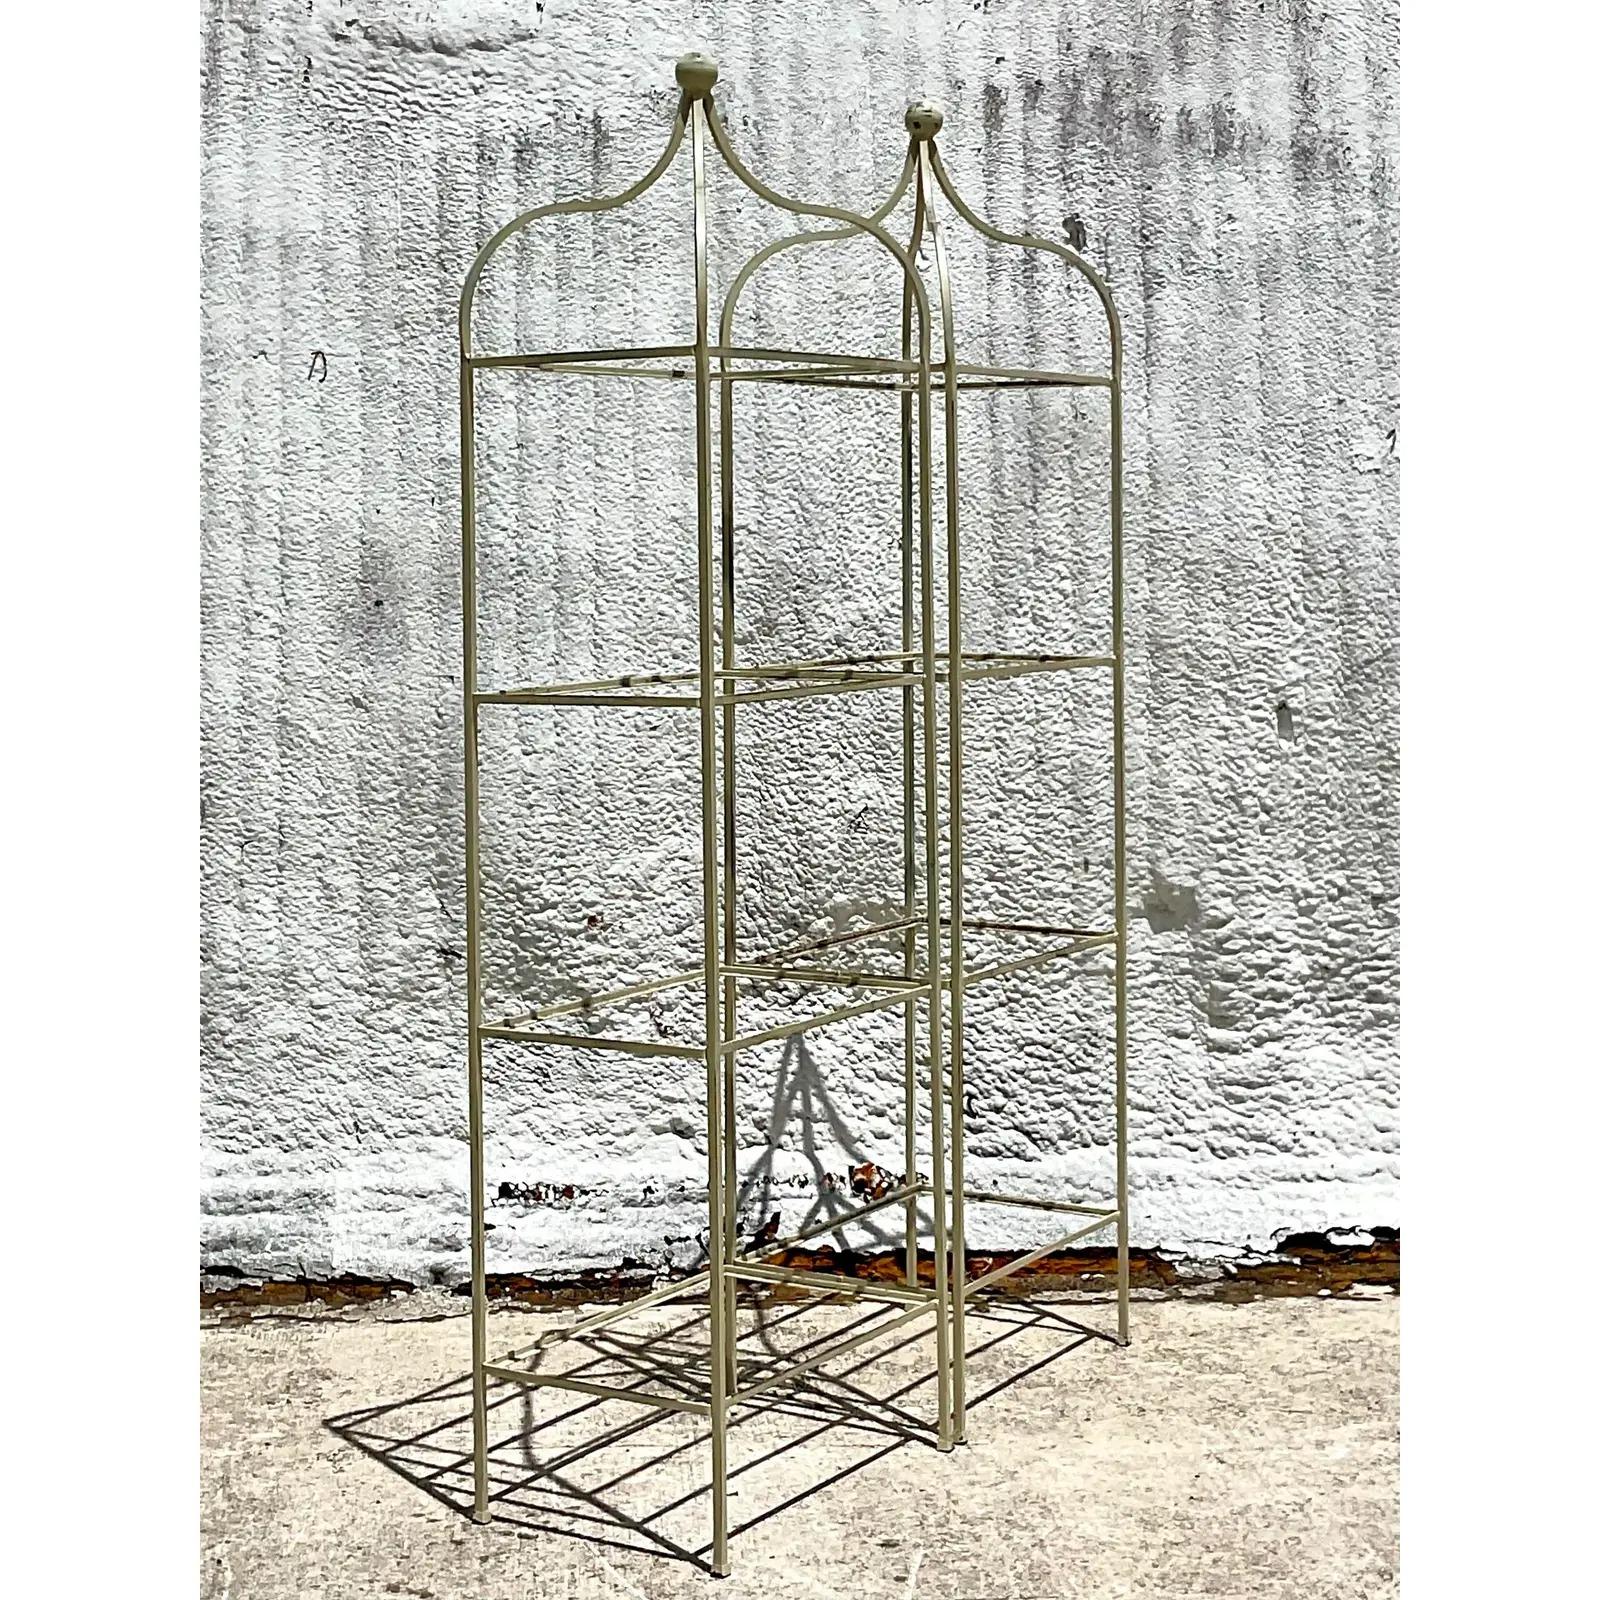 Fabulous pair of vintage wrought iron etagere. Beautiful Regency design with a chic peak design. Currently an off white, but easily changed to any color that works for you. Inset glass shelves. Acquired from a Palm Beach estate.